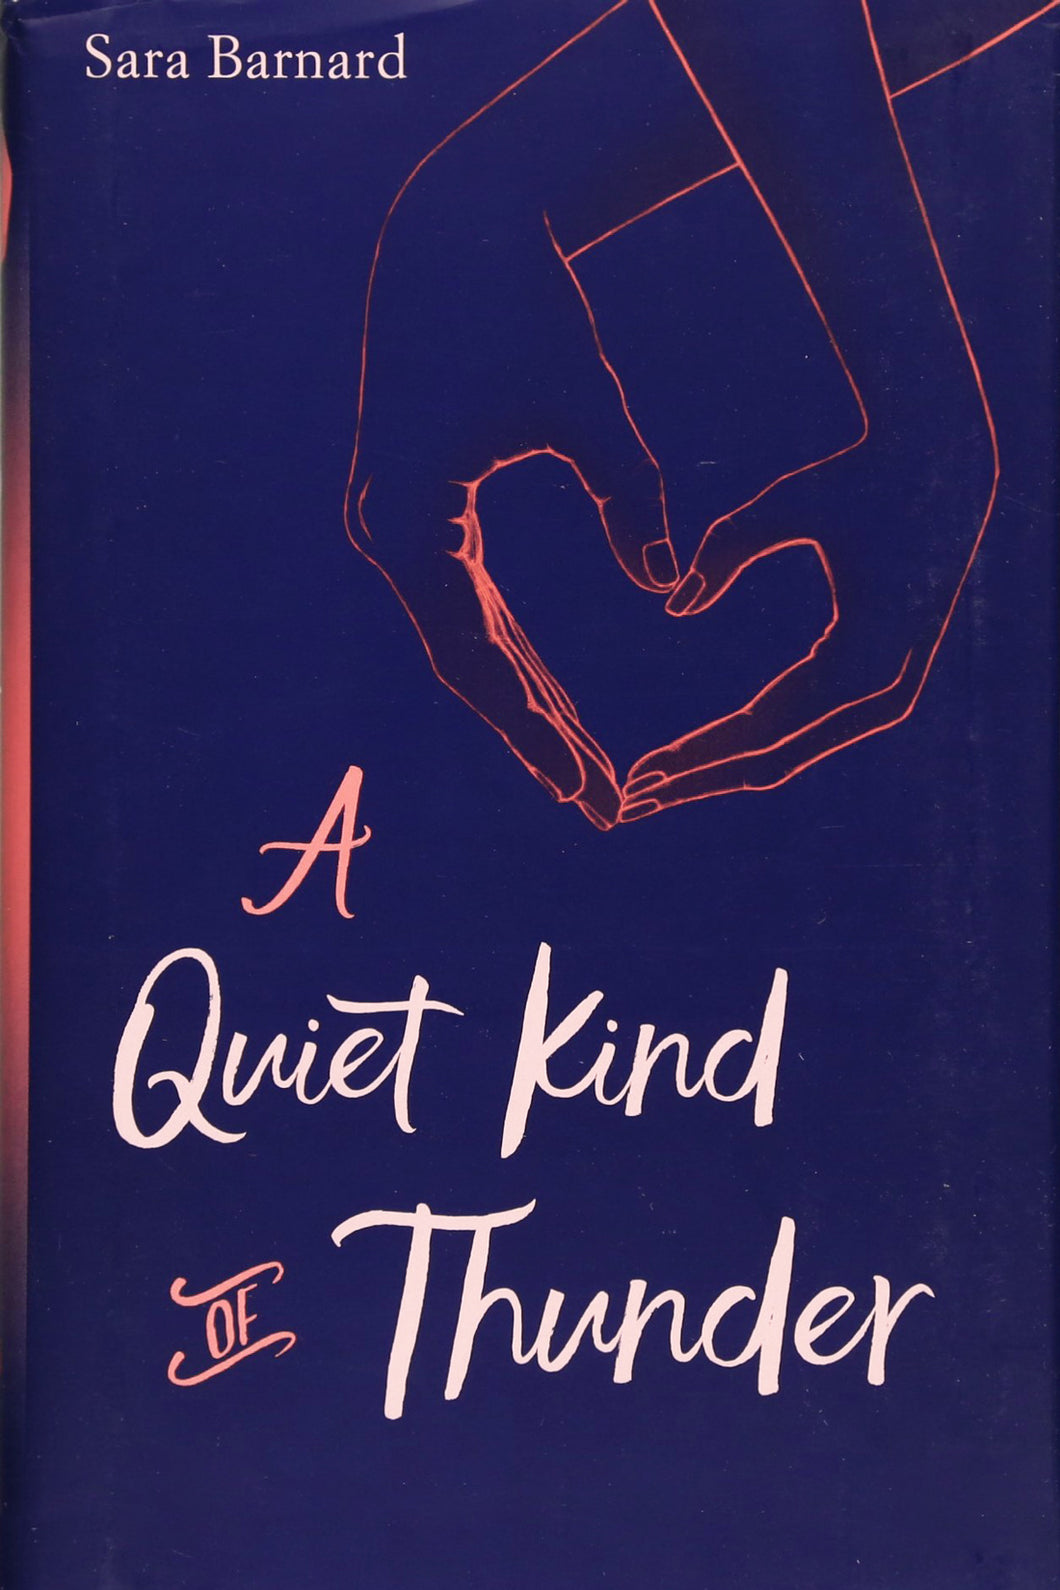 A Quiet Kind of Thunder by Sara Barnard / Hardcover or Paperback - NEW BOOK